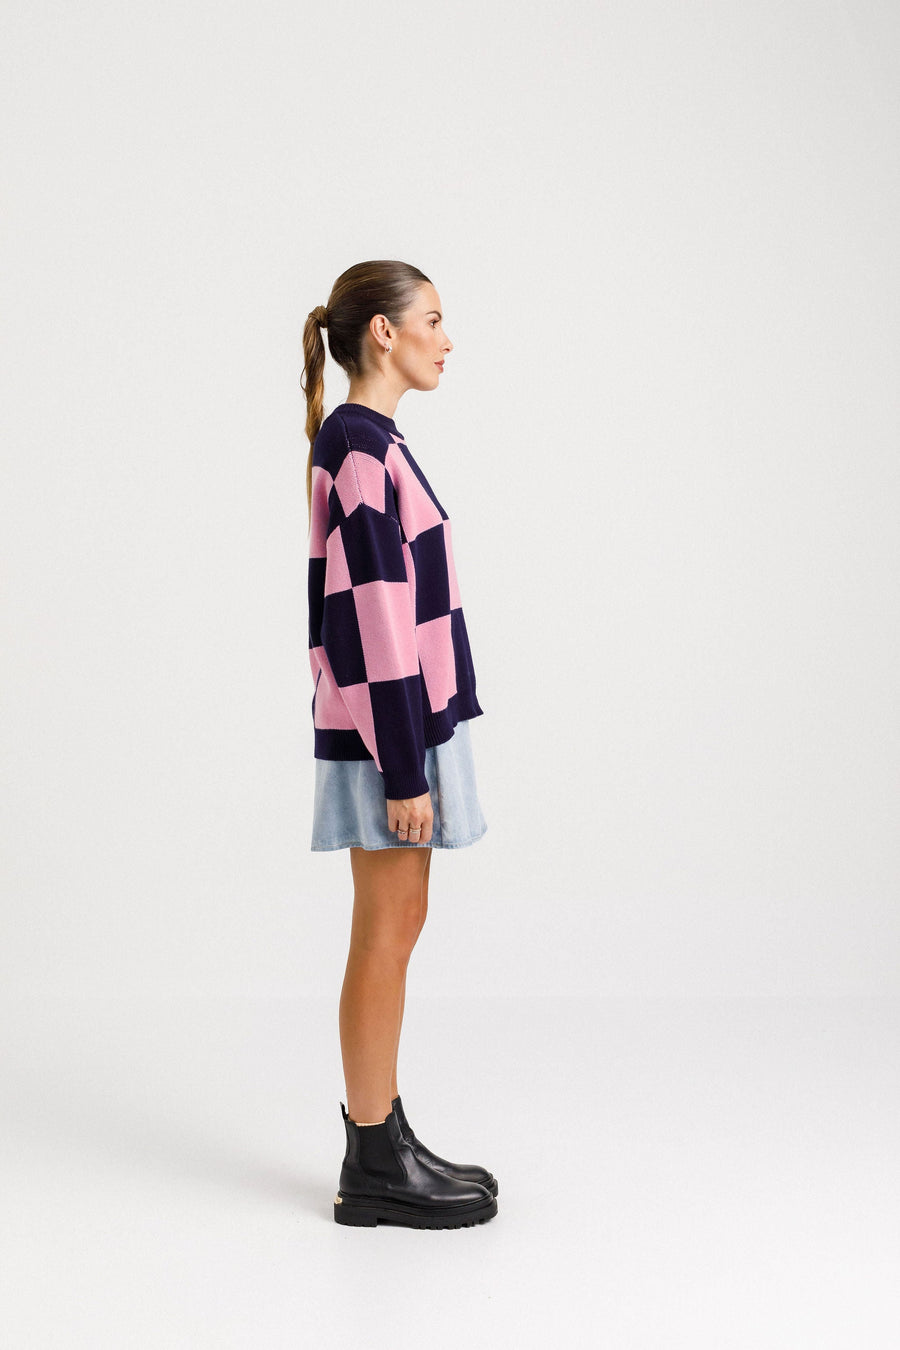 THING THING CLEO CHECK IT JUMPER - BALLET NAVY - WILDROSE